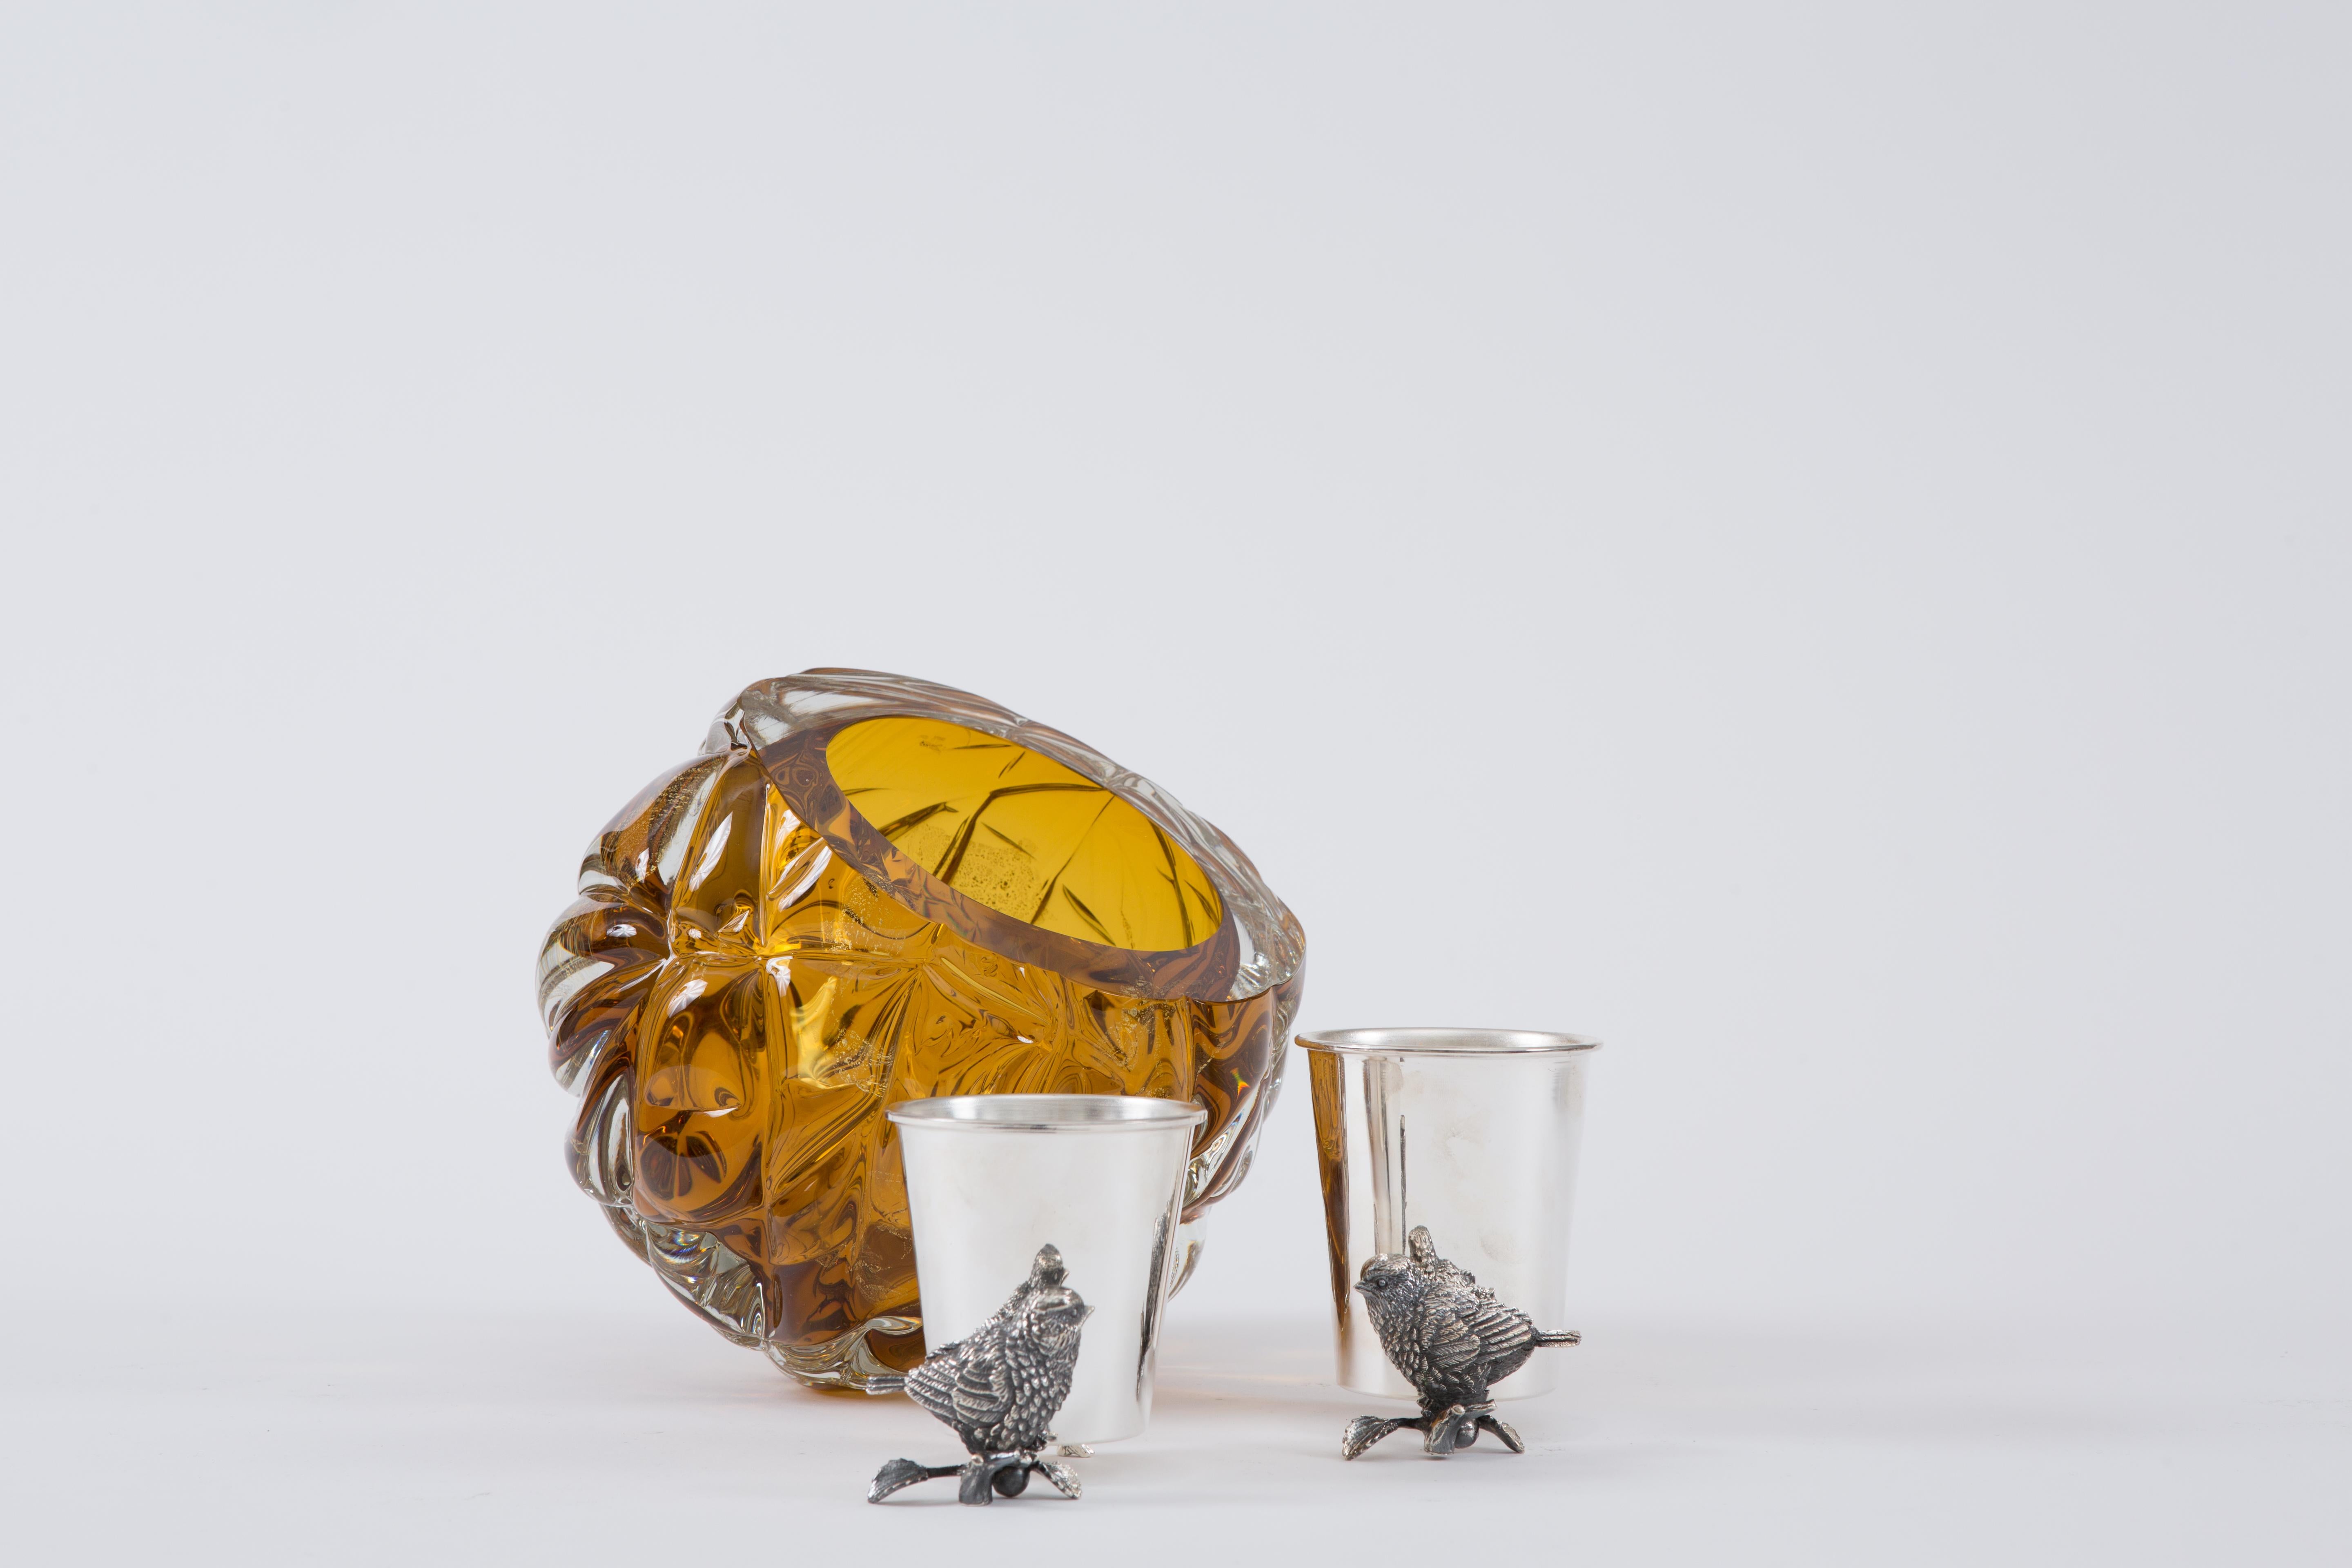 Contemporary Modern Handmade Amber Glass and Gold Leaf 'Cut' Vase Made in Brooklyn For Sale